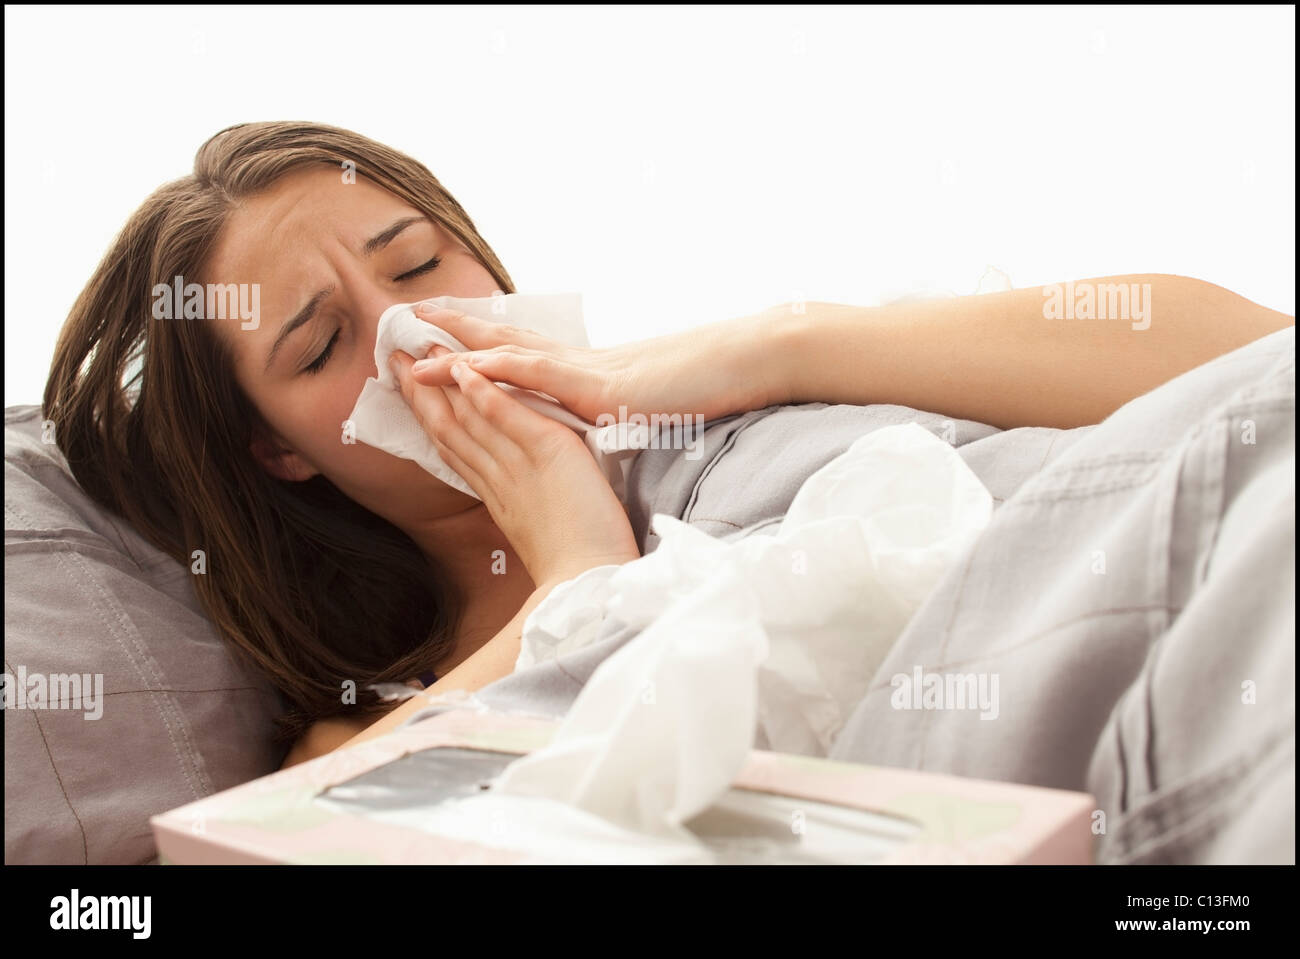 USA, Utah, Lehi, young woman lying in bed blowing nose Stock Photo